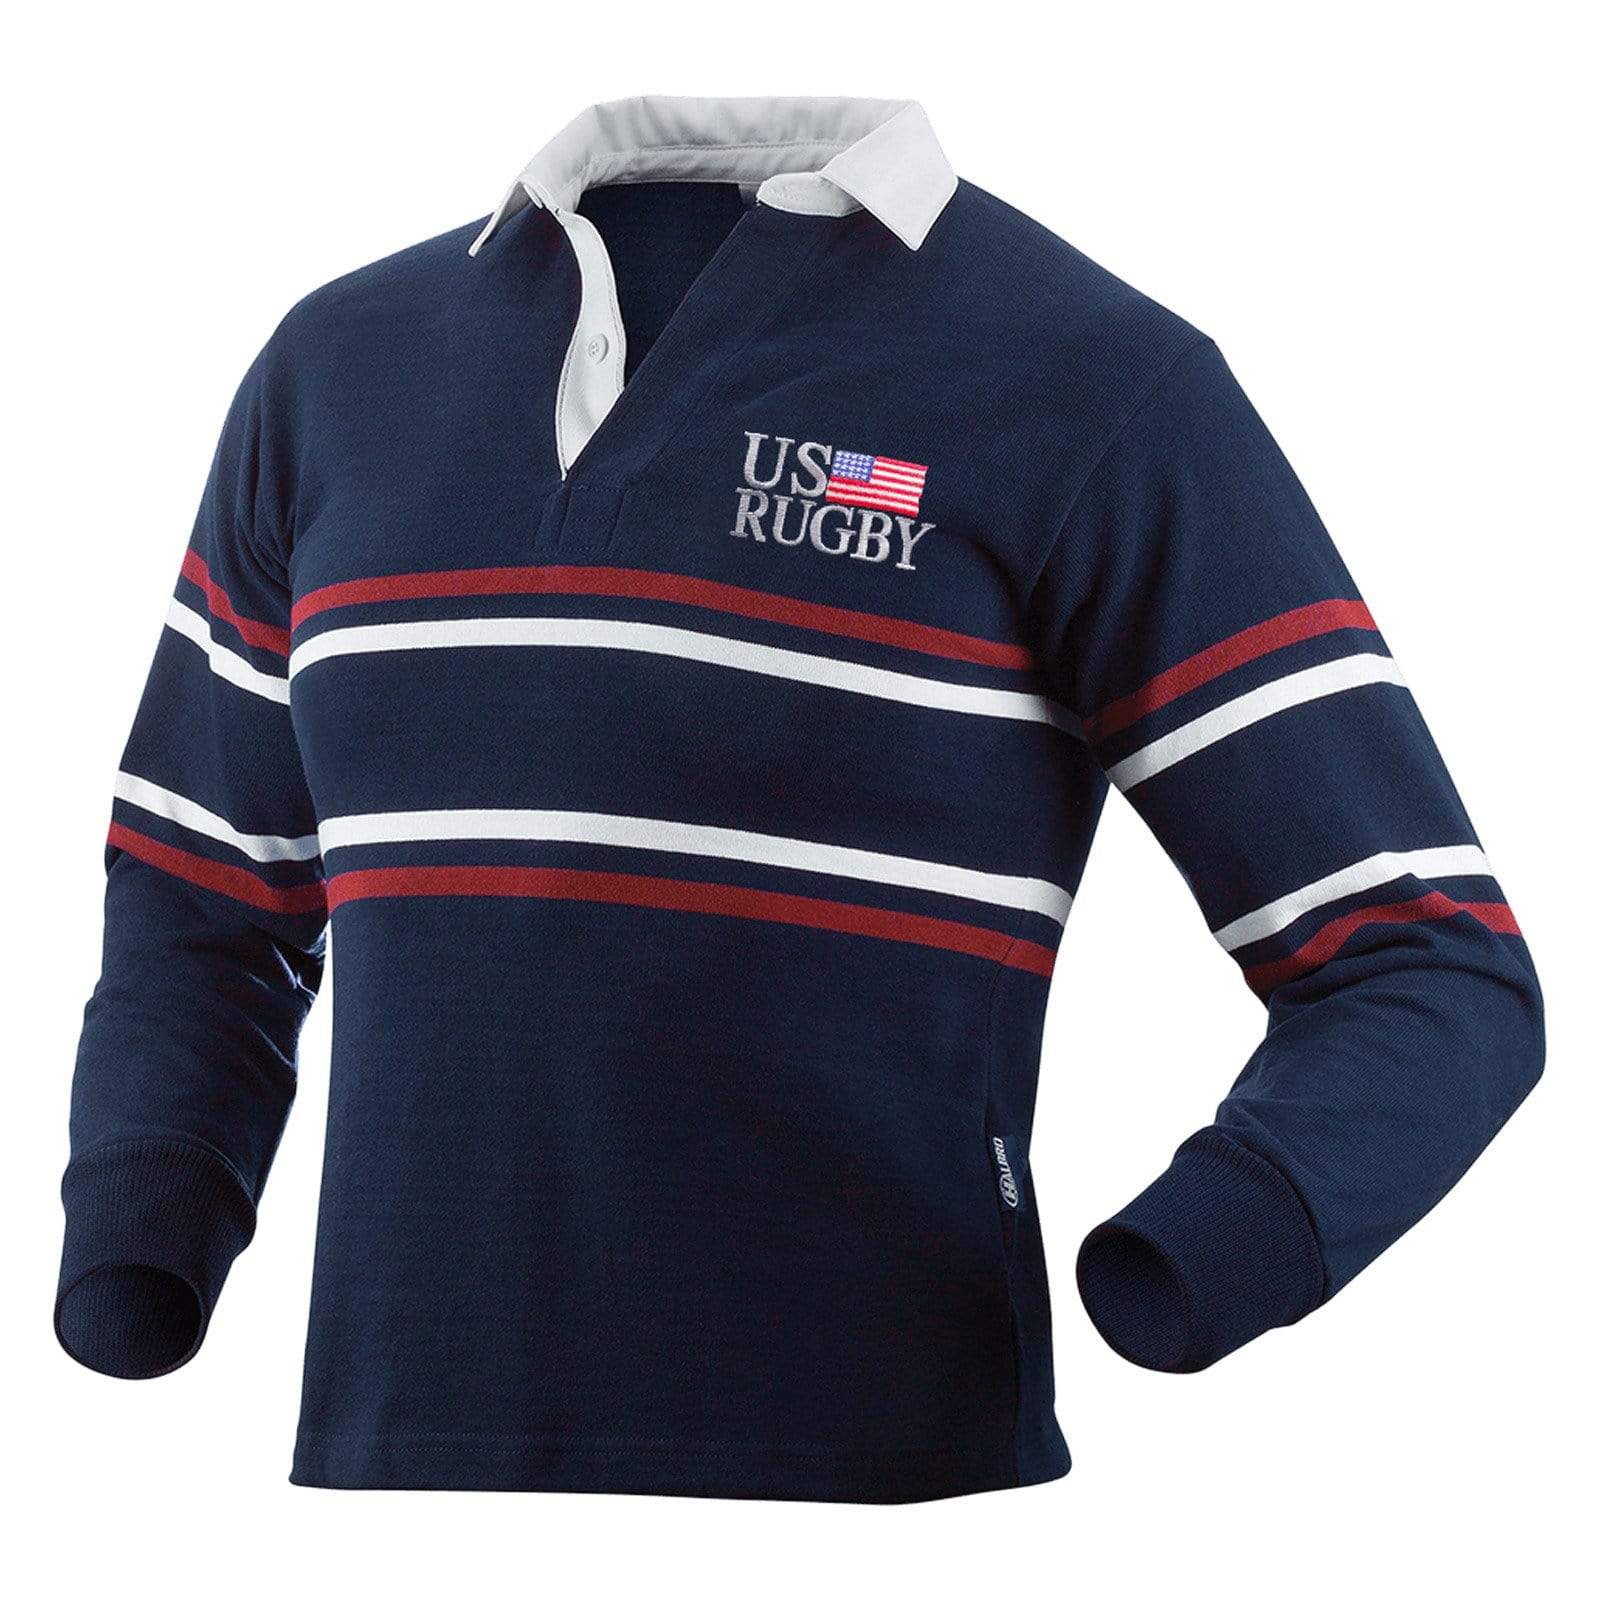 Vintage Adidas USA Rugby Pullover | Vintage adidas, Usa rugby, Sports  jersey design